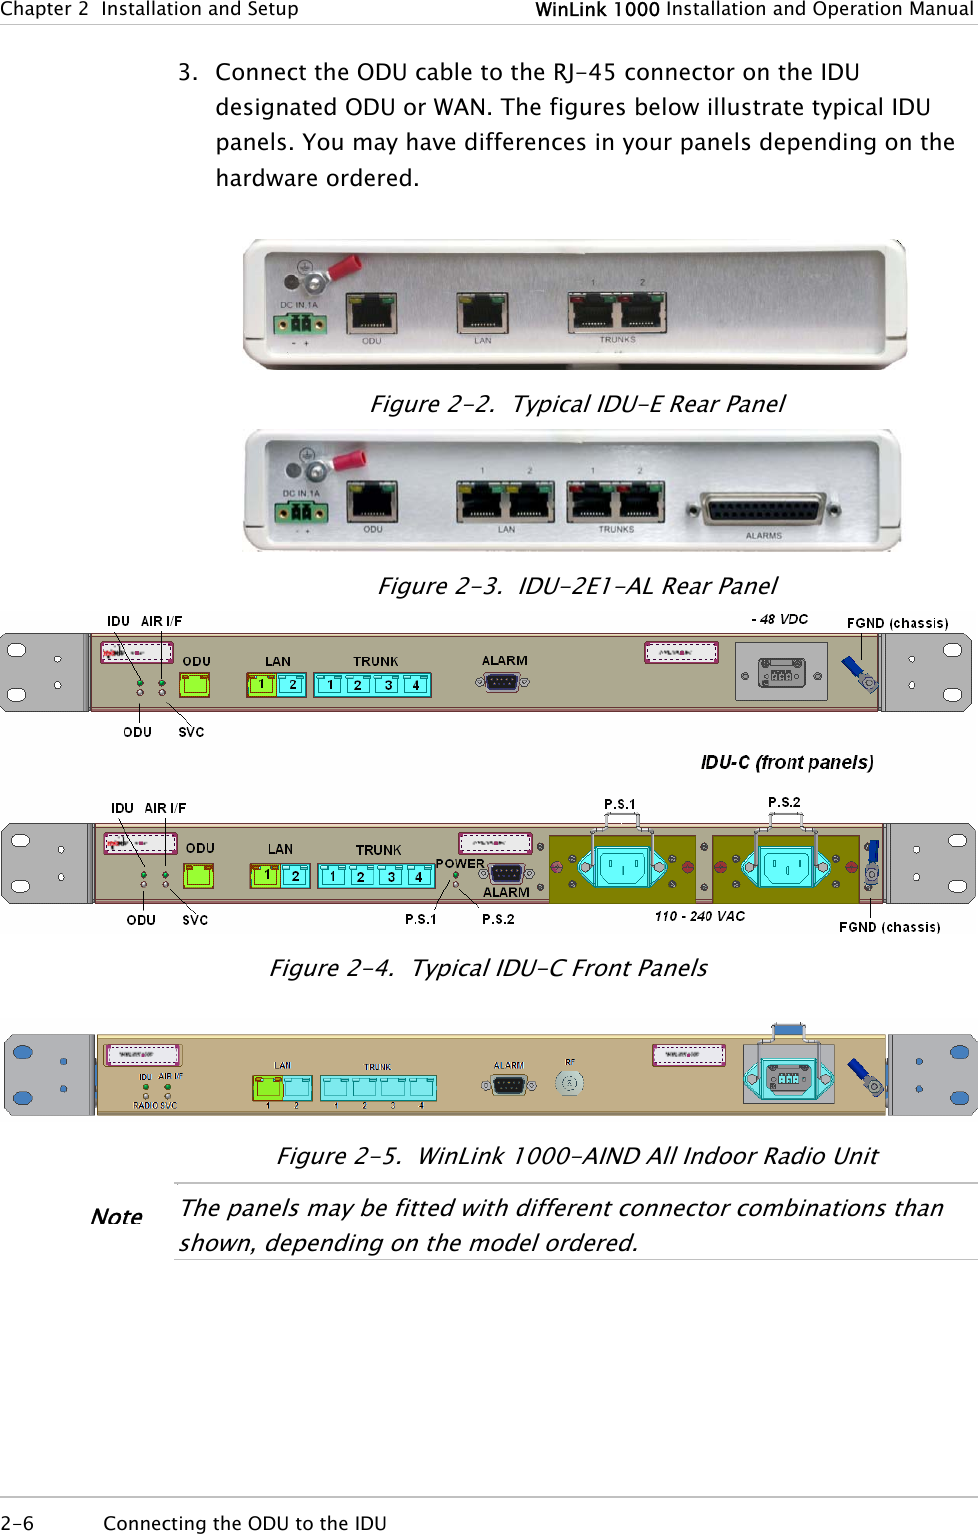 Chapter  2  Installation and Setup  WinLink 1000 Installation and Operation Manual 3. Connect the ODU cable to the RJ-45 connector on the IDU designated ODU or WAN. The figures below illustrate typical IDU panels. You may have differences in your panels depending on the hardware ordered.    Figure  2-2.  Typical IDU-E Rear Panel   Figure  2-3.  IDU-2E1-AL Rear Panel  Figure  2-4.  Typical IDU-C Front Panels  Figure  2-5.  WinLink 1000-AIND All Indoor Radio Unit •  The panels may be fitted with different connector combinations than shown, depending on the model ordered. Note 2-6  Connecting the ODU to the IDU   